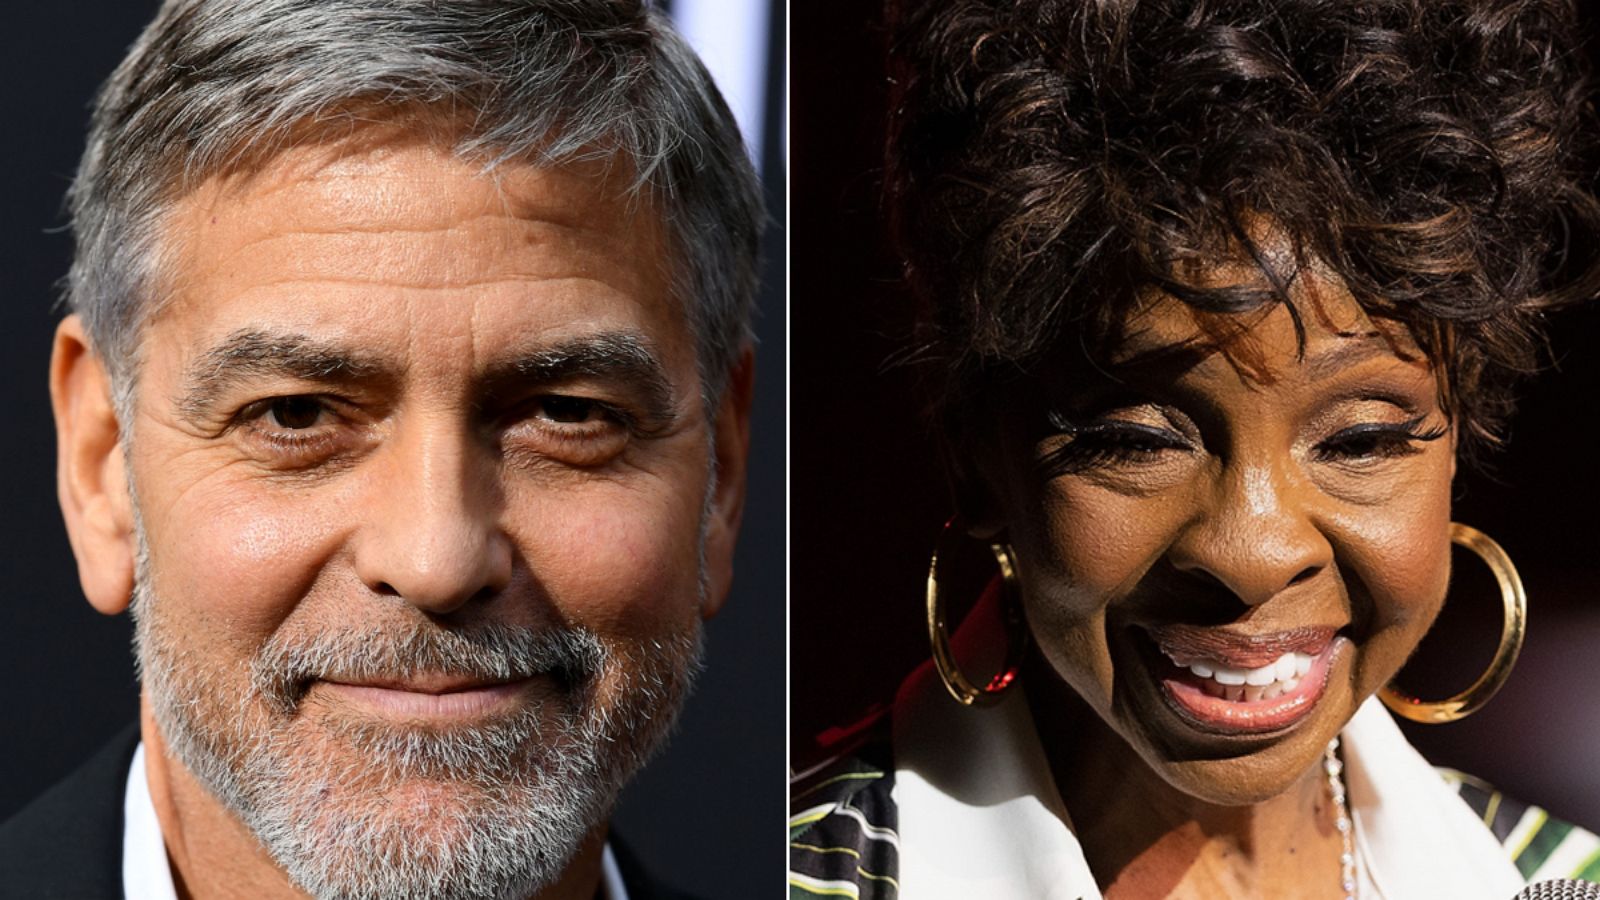 PHOTO: George Clooney at TCL Chinese Theatre on May 7, 2019 in Hollywood, Calif. | Gladys Knight performs on June 29, 2022 in London.